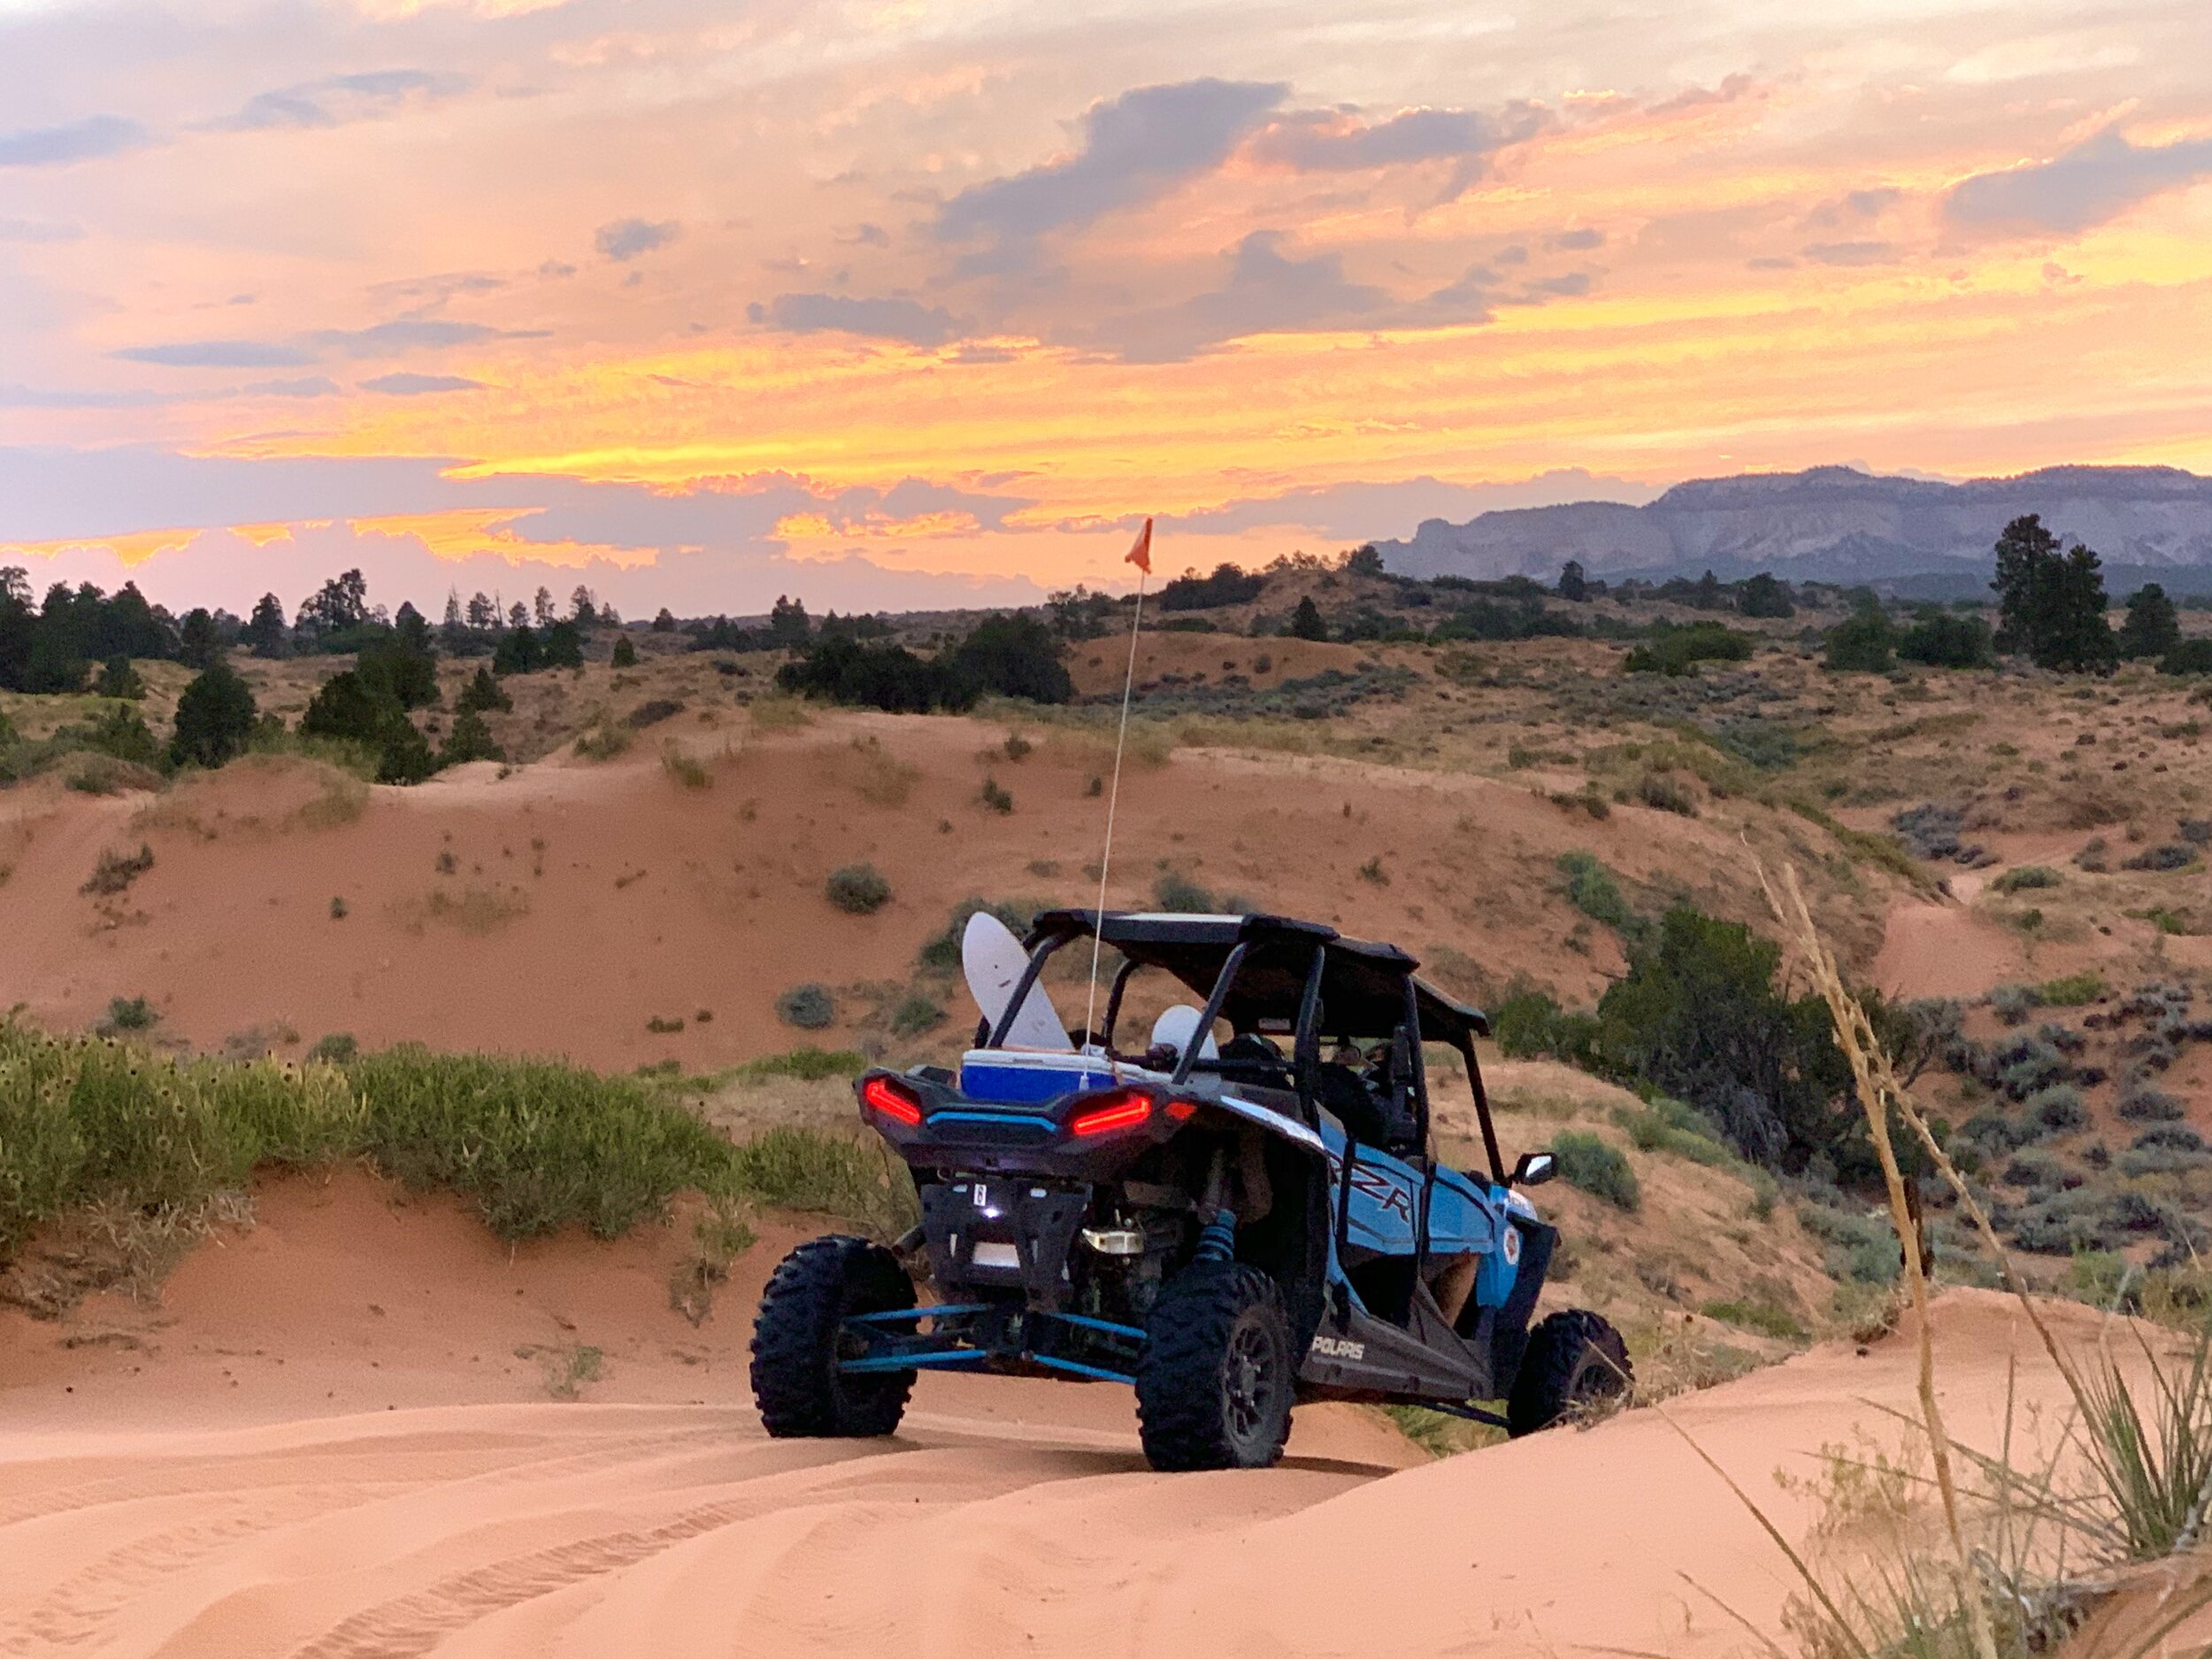  In Kanab, we took a Side-by-Side ATV excursion. Our guide drove very fast. It was a tad stressful—and a total blast trying to keep up with him! 